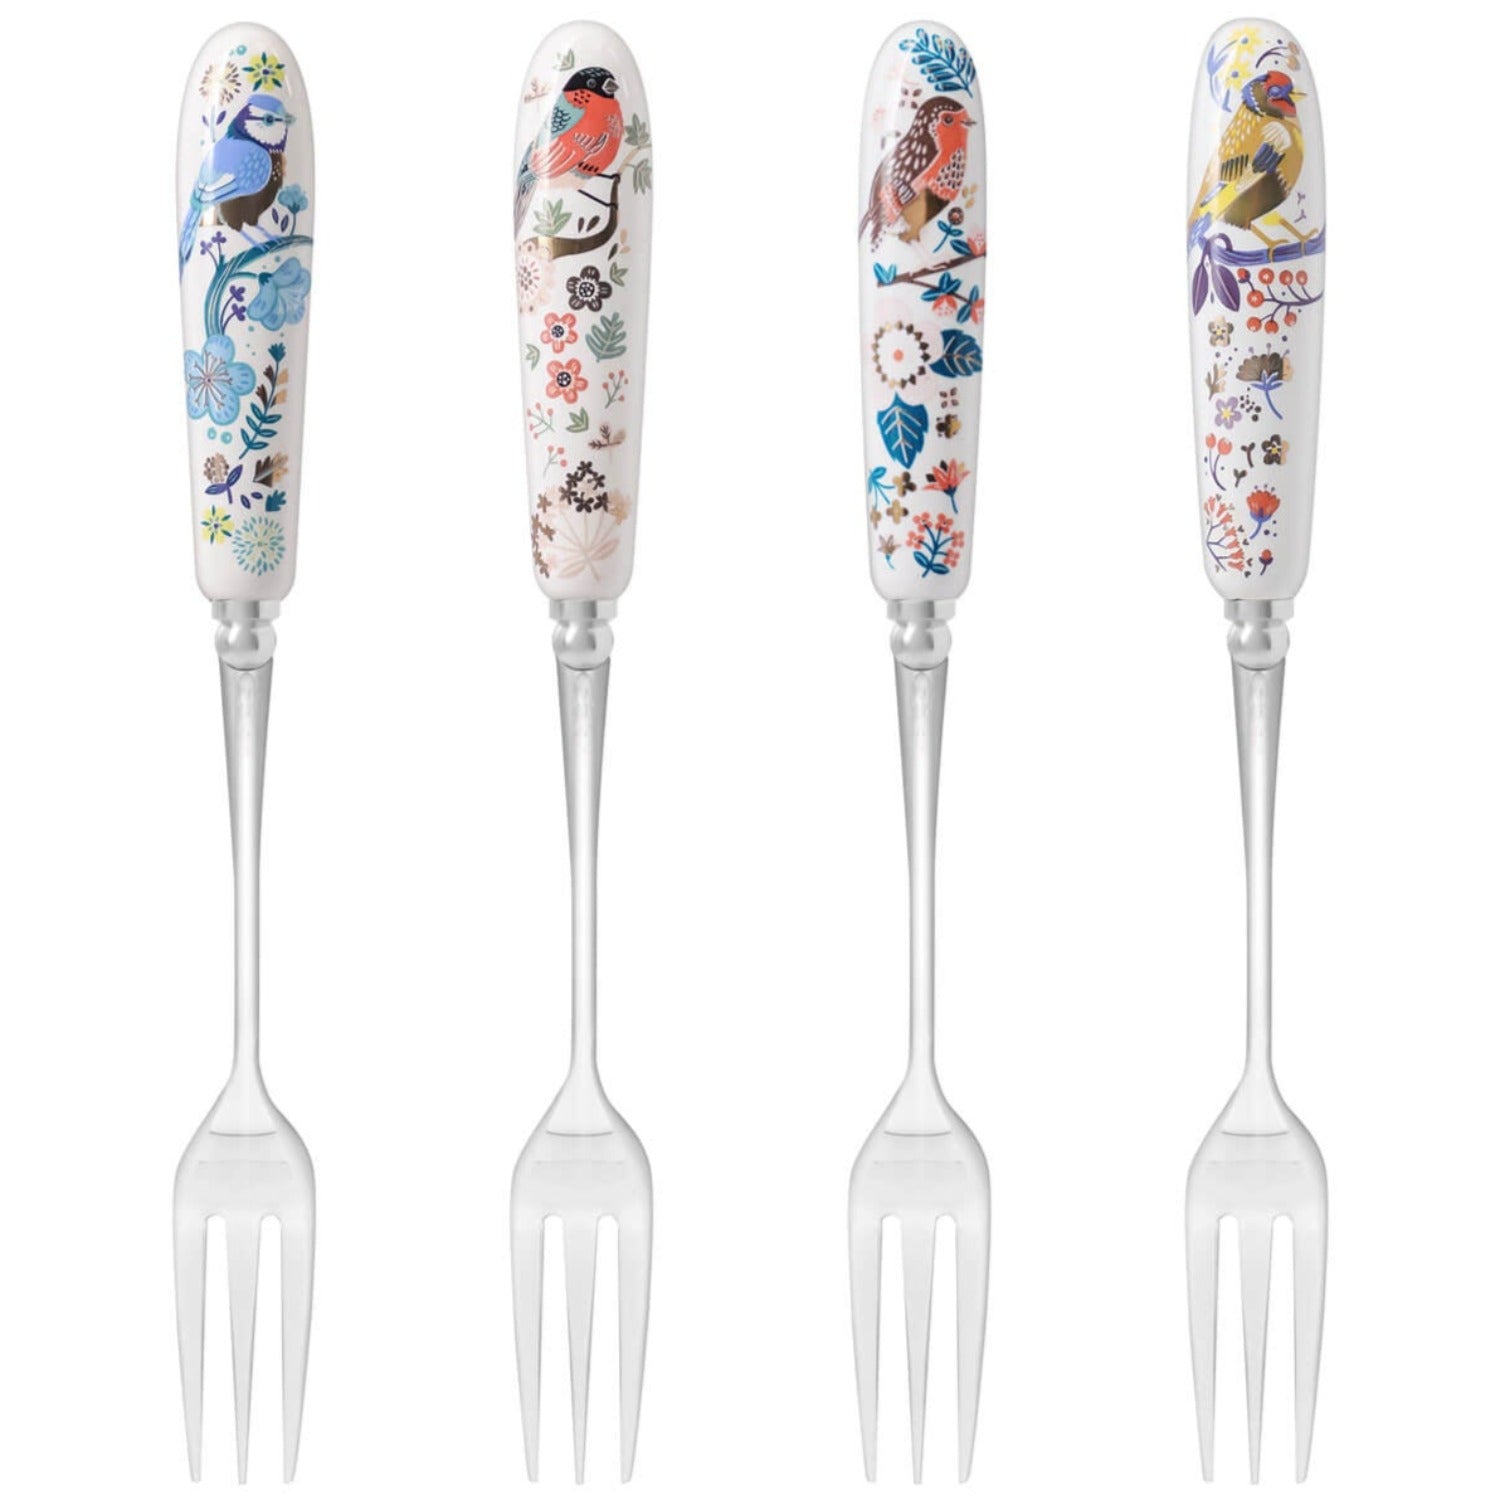 Tipperary Crystal Birdy 4 piece Dessert Fork Gift Set 1 Shaws Department Stores